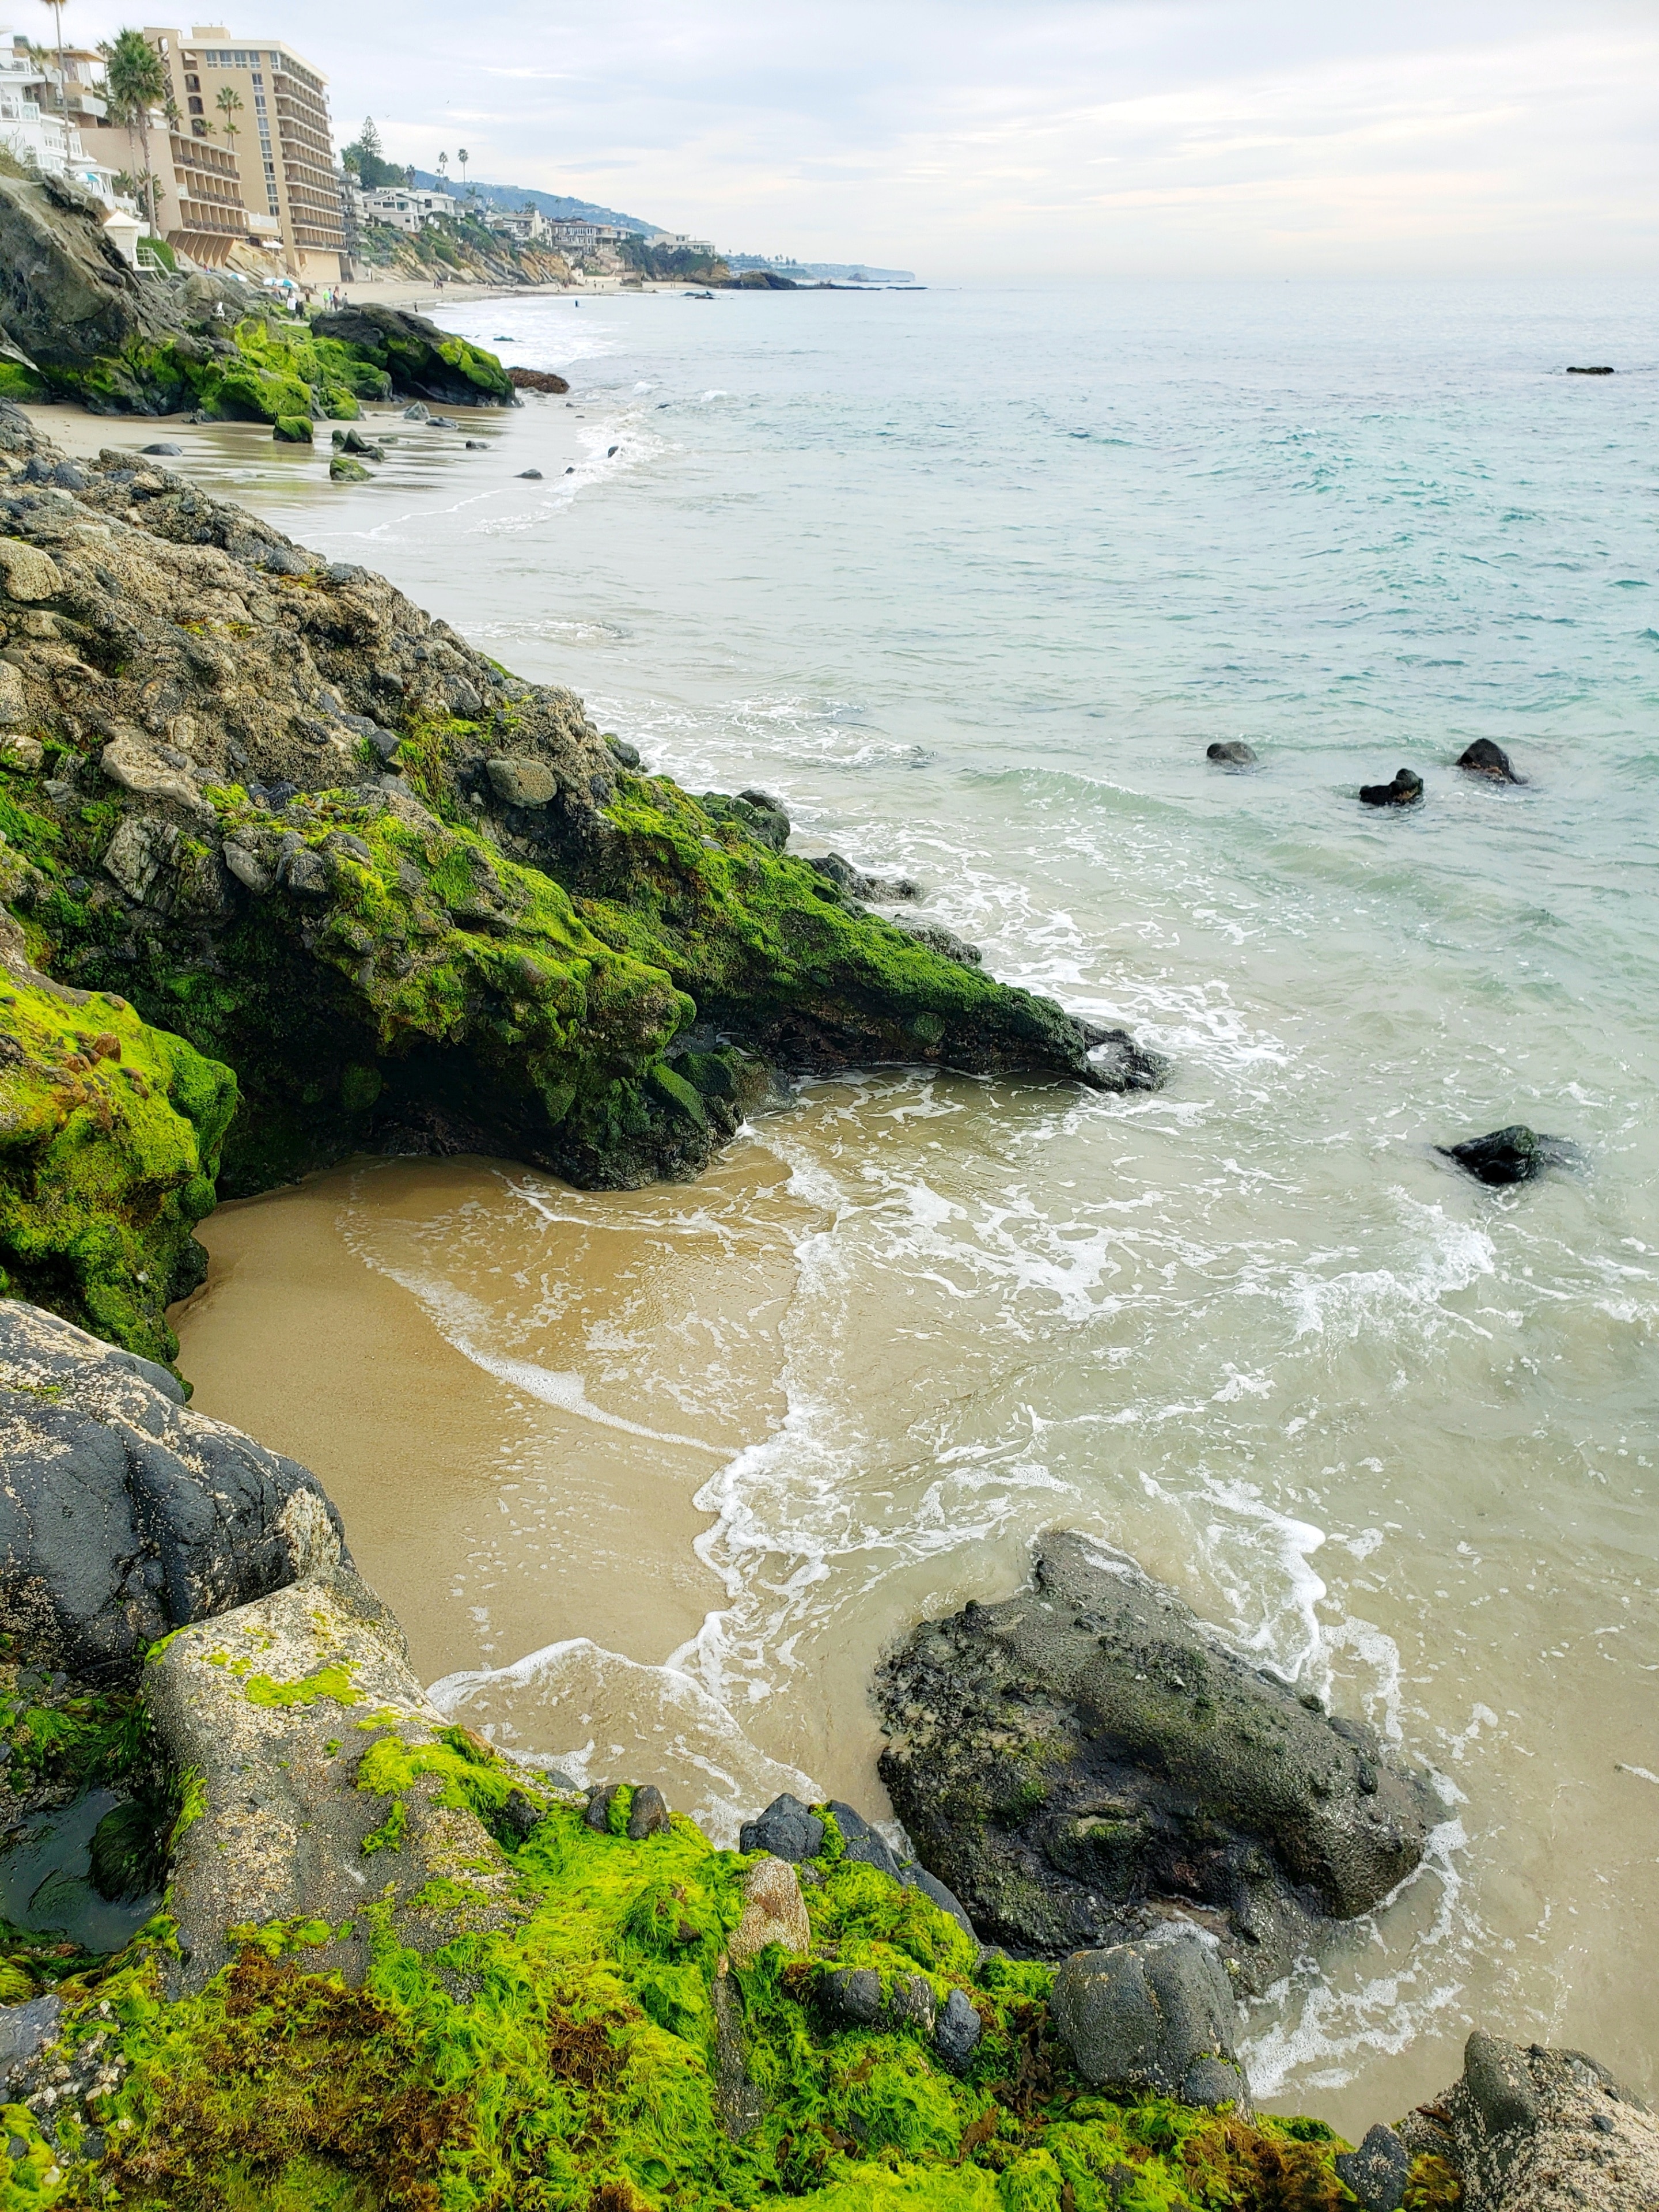 Laguna Beach is a great place to explore with huge rocks among the coast that house small caves and hidey-holes, clear water and mild temperatures even in winter. The city has some wonderful restaurants and art galleries. Just make sure to be paying special attention when driving.